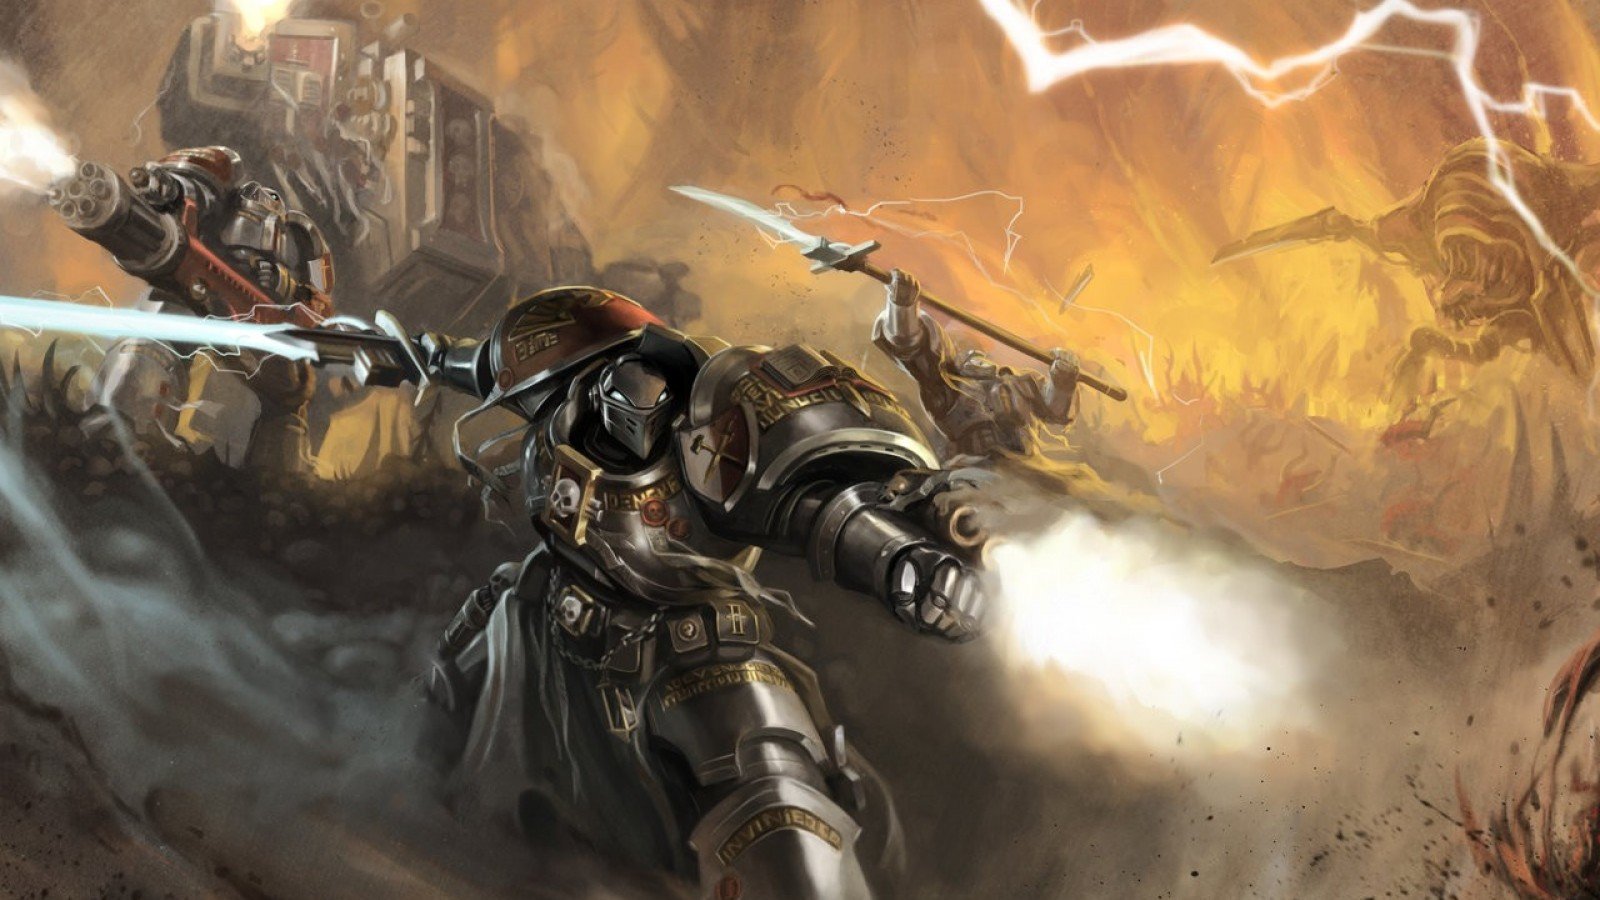 Best Warhammer 40k Wallpaper Id 272442 For High Resolution Hd Images, Photos, Reviews